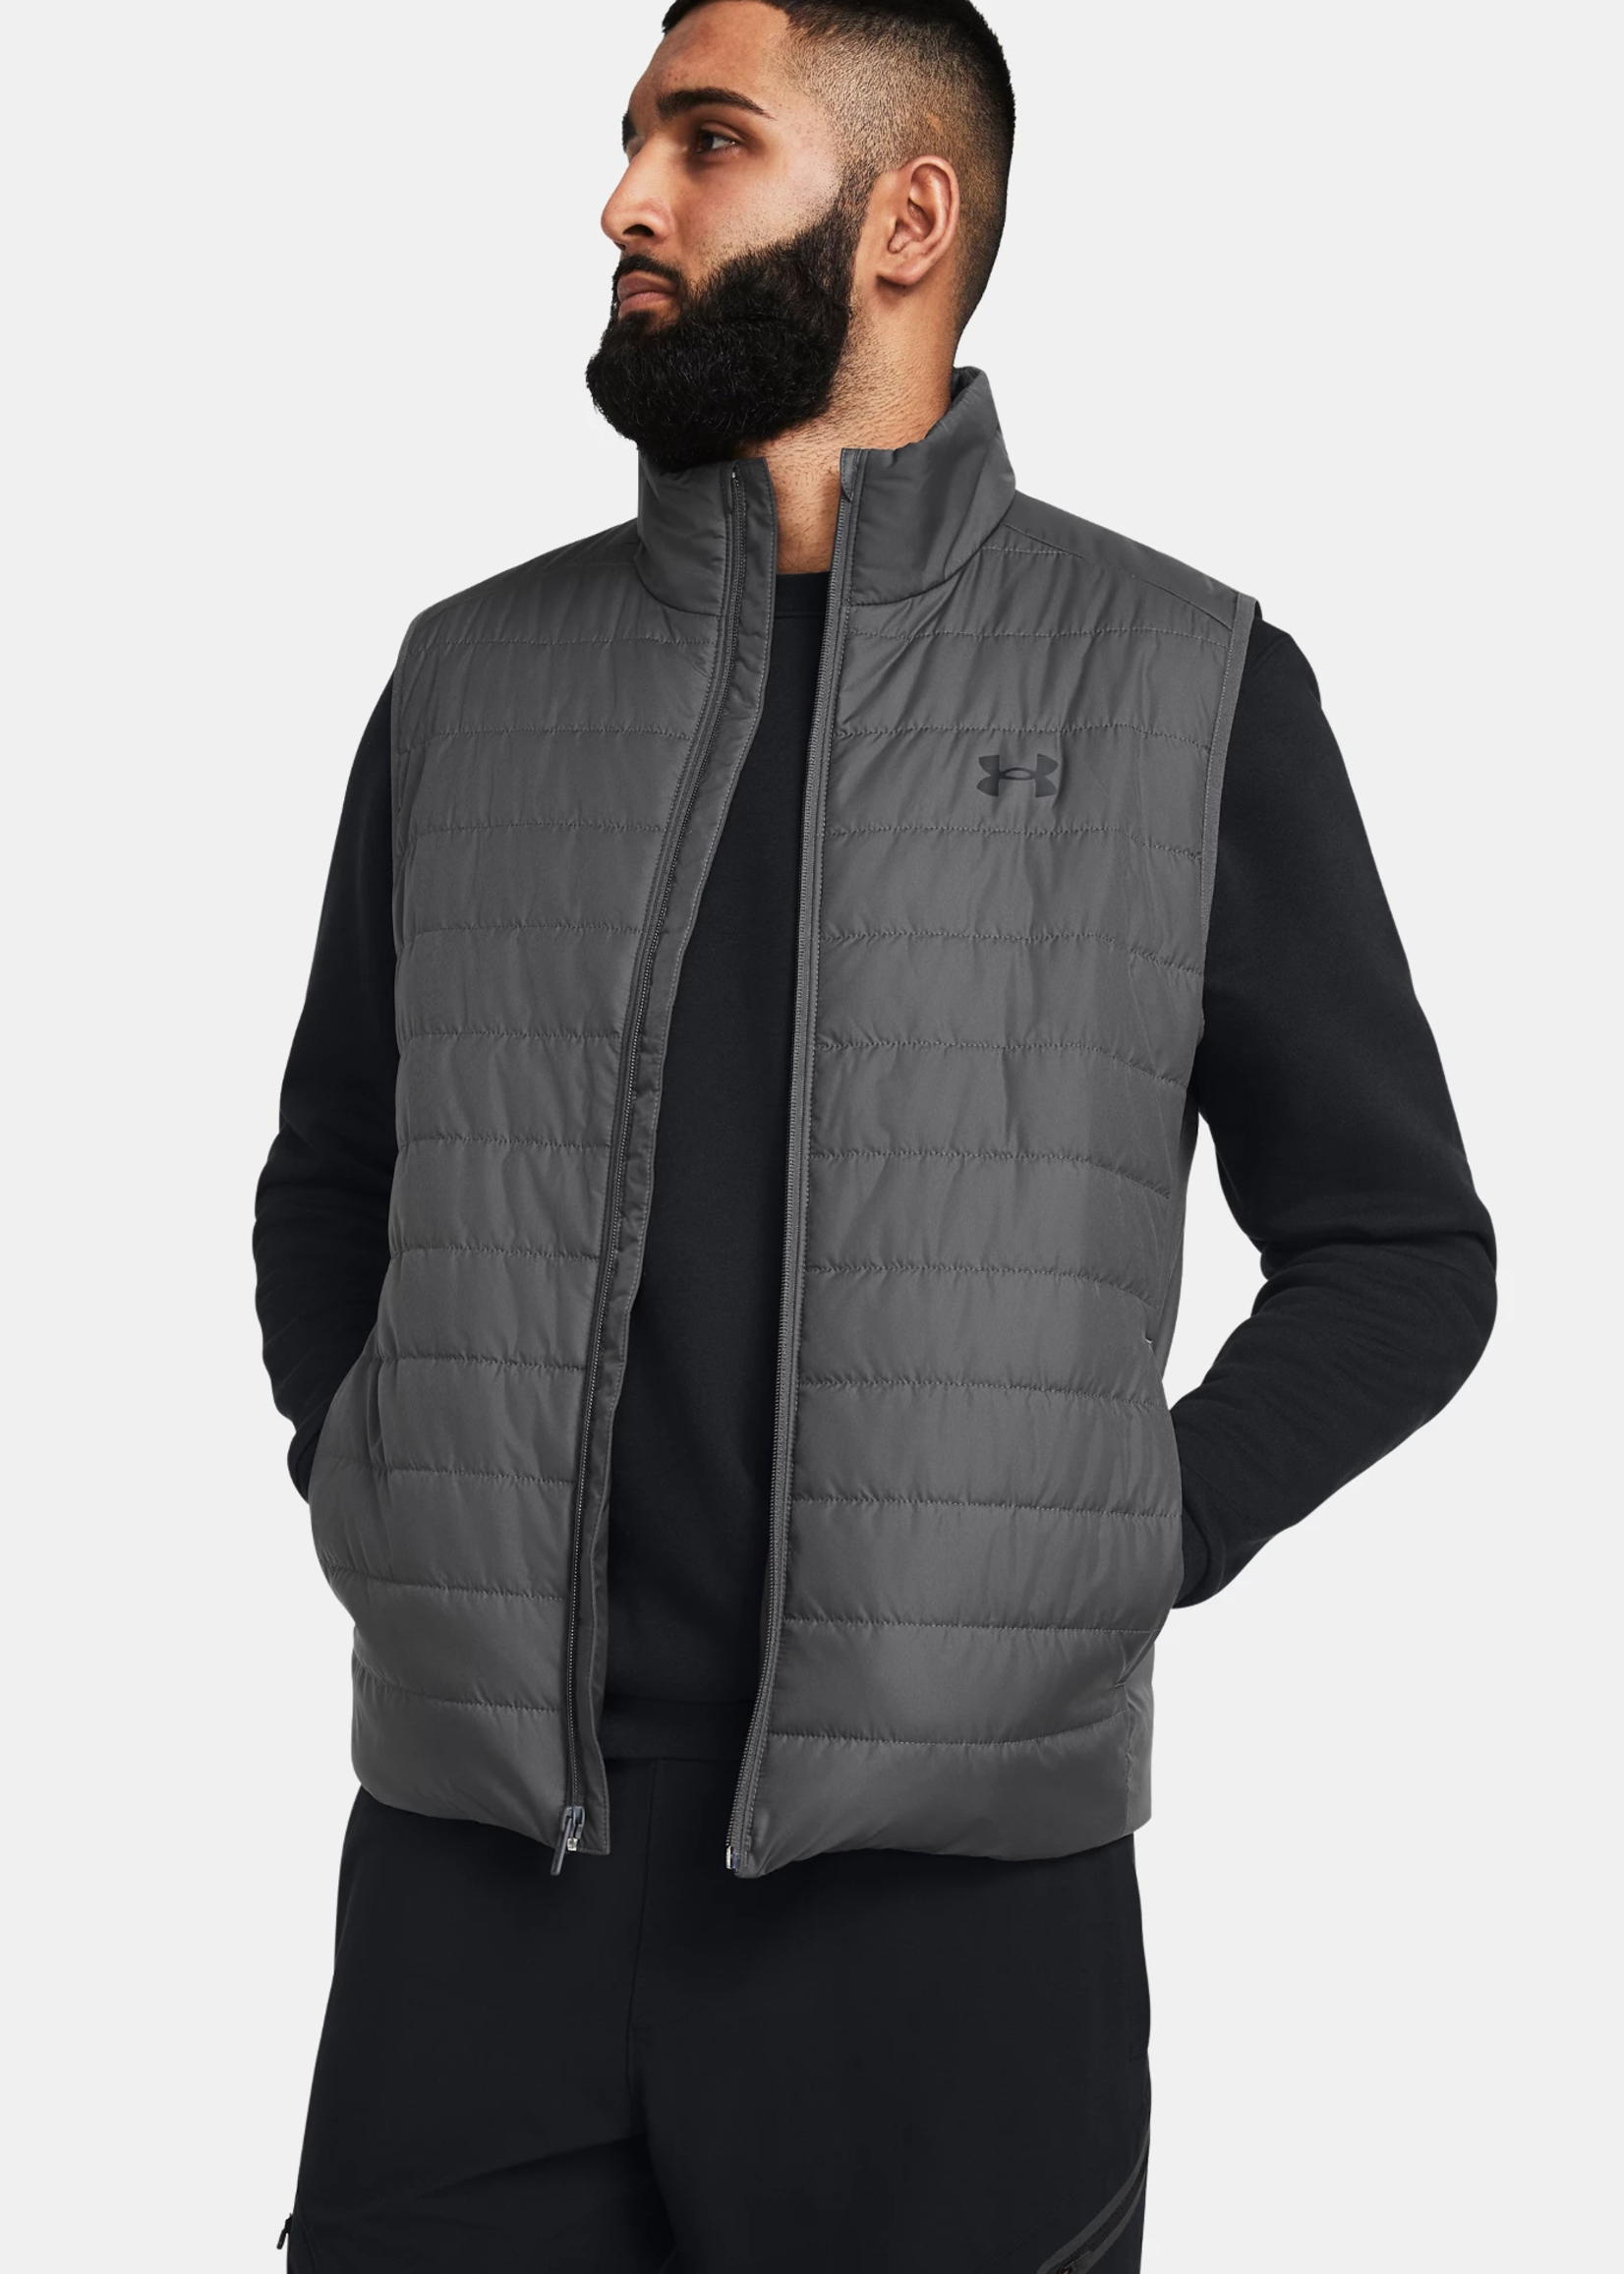 Under Armour STORM INSULATE RUN Vest-GRY